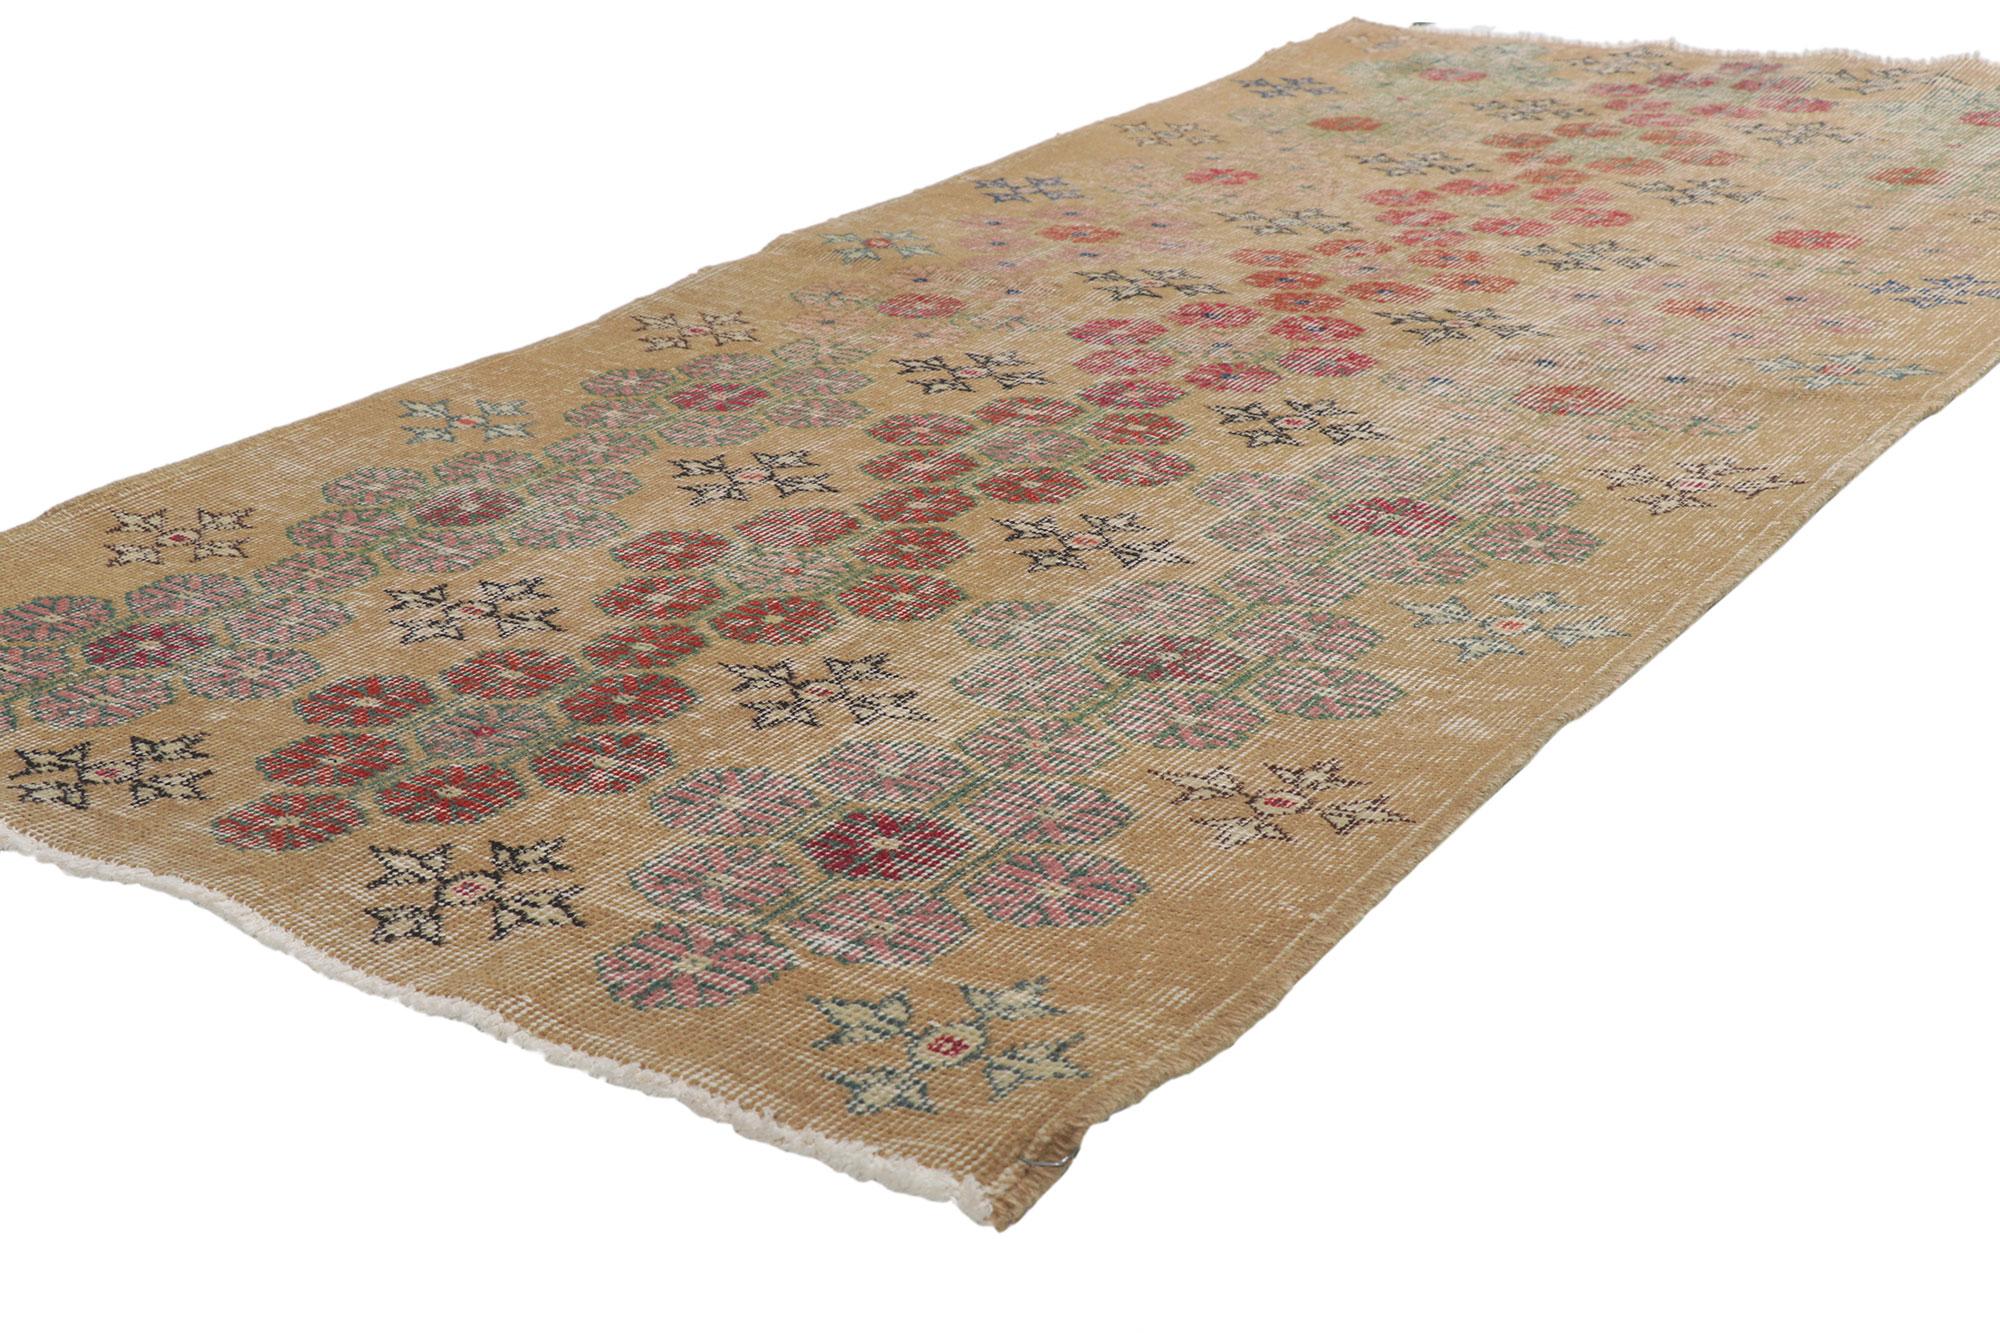 51971 Distressed Vintage Turkish Sivas Rug with Rustic Arts and Crafts Style 03'03 x 06'11. With the perfect mix of simplicity and luxury, this hand-knotted wool distressed vintage Turkish Sivas rug embodies a rustic Arts & Crafts style. It features